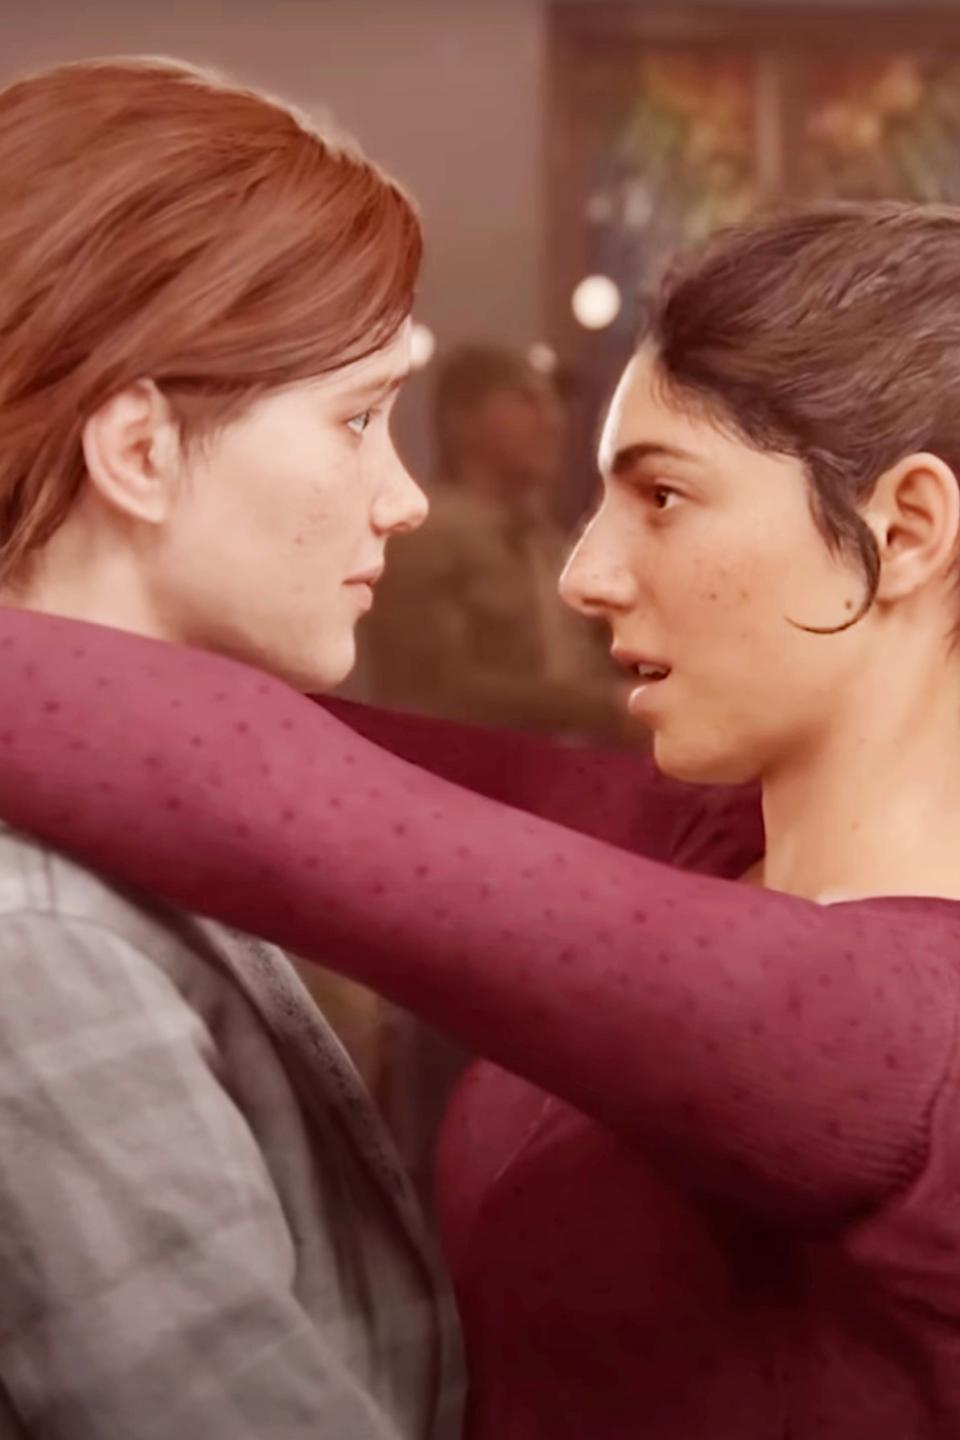 Ellie and Dina from The Last of Us game are close, about to share a moment